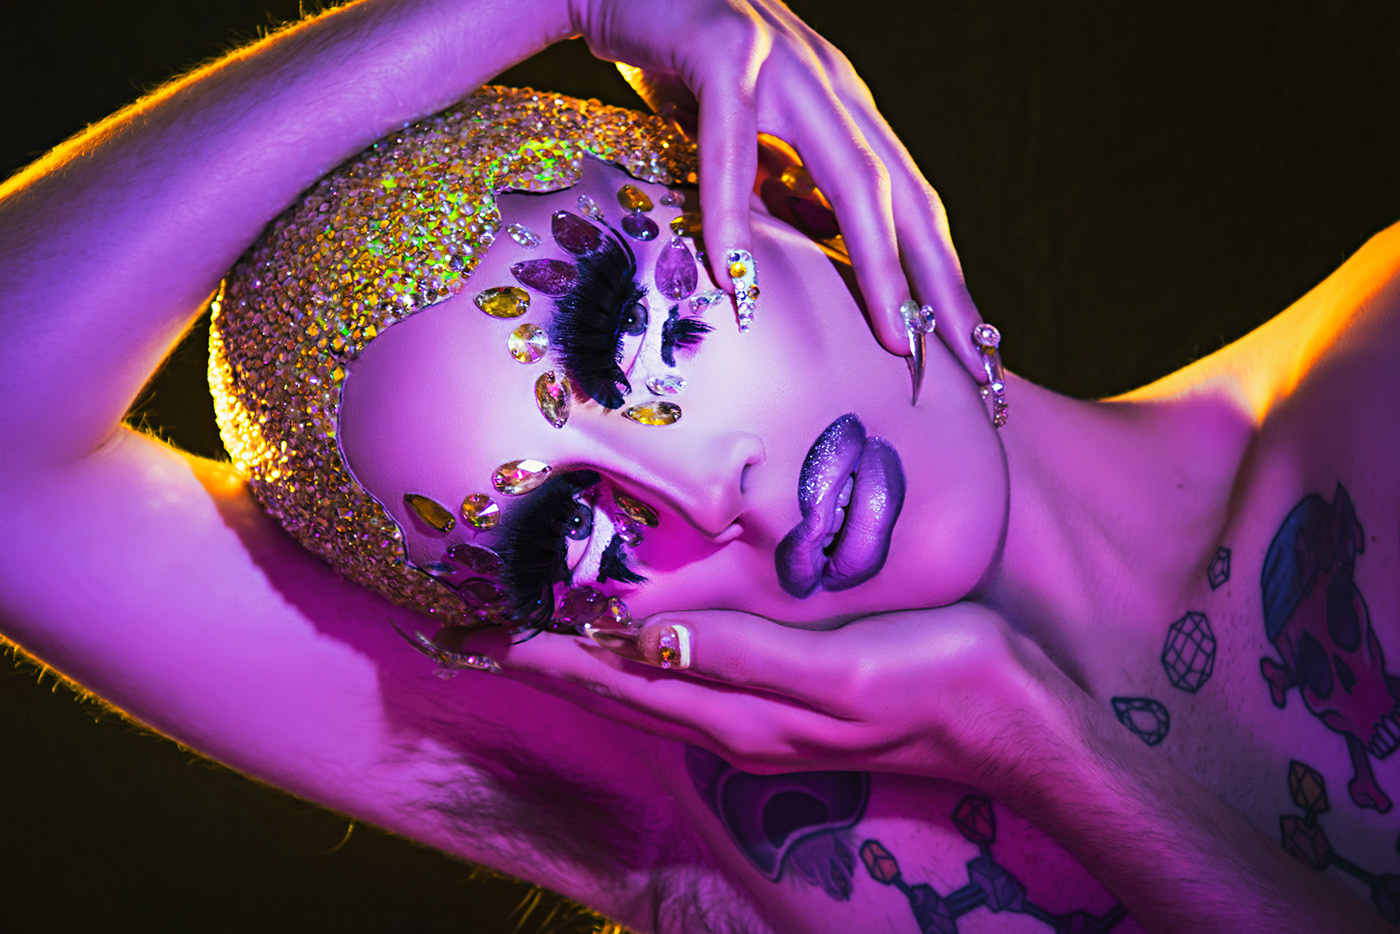 adobeawards Photography  art direction  Creative Direction  drag queen digital photography  LGBTQ